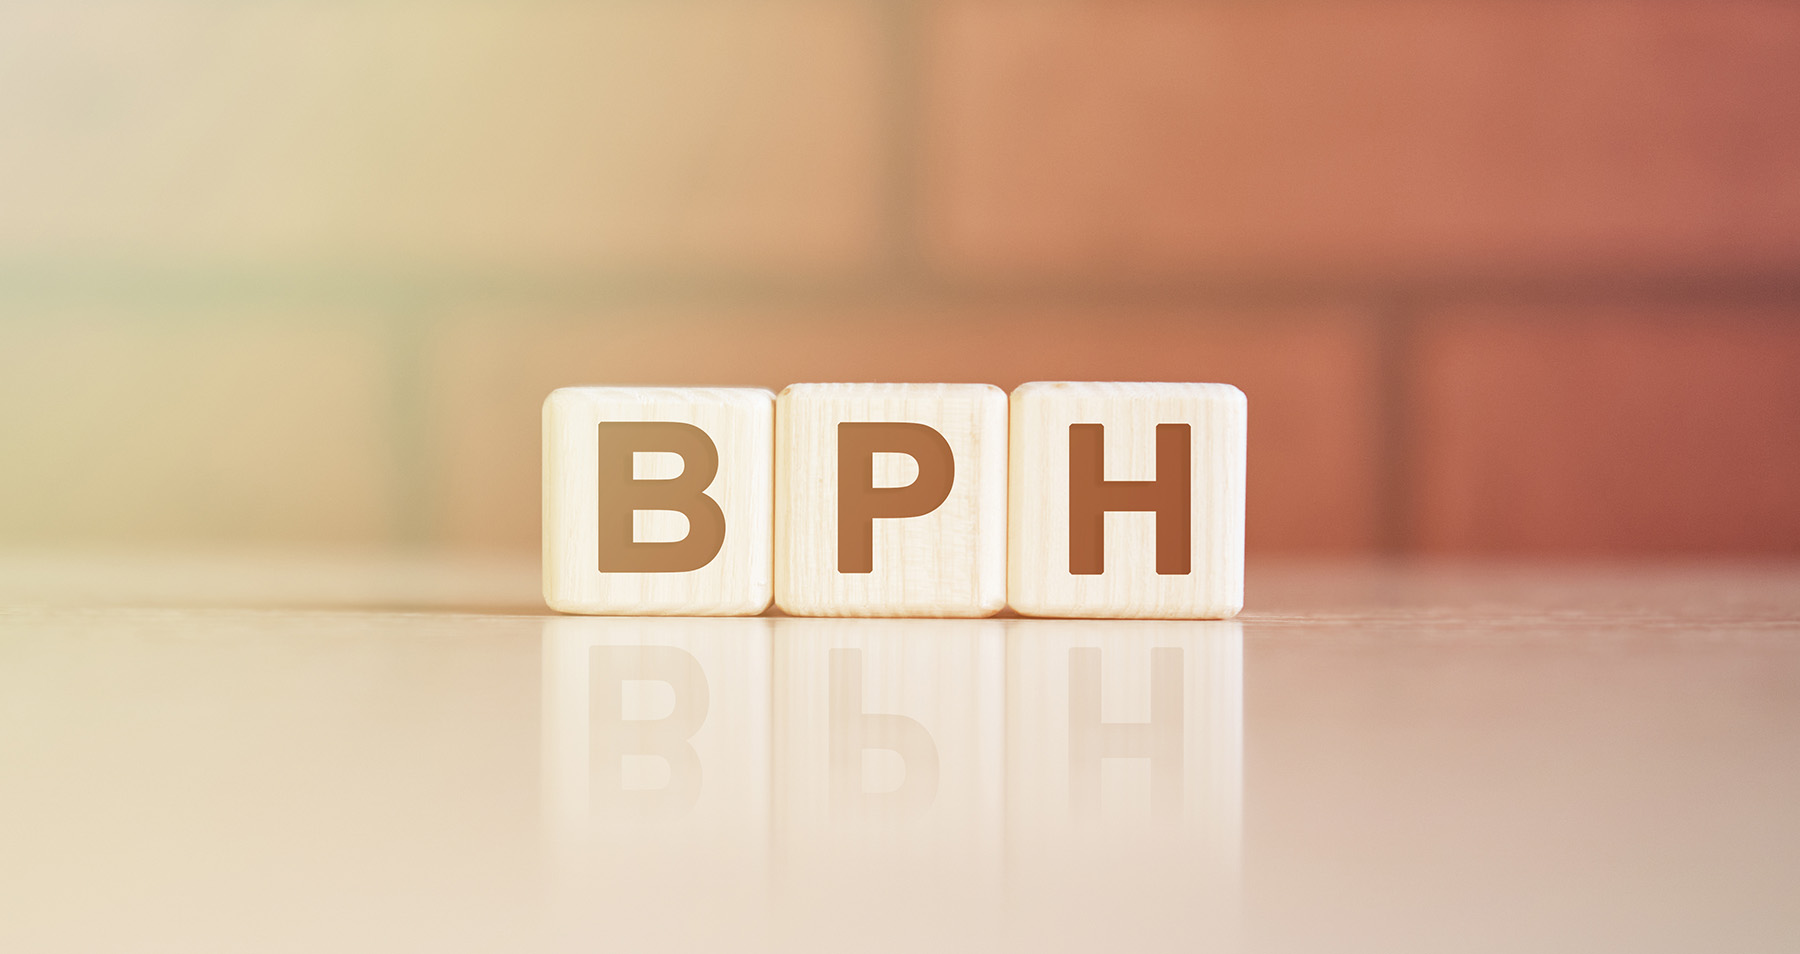 Graphic of BPH on letter blocks on a faded background.